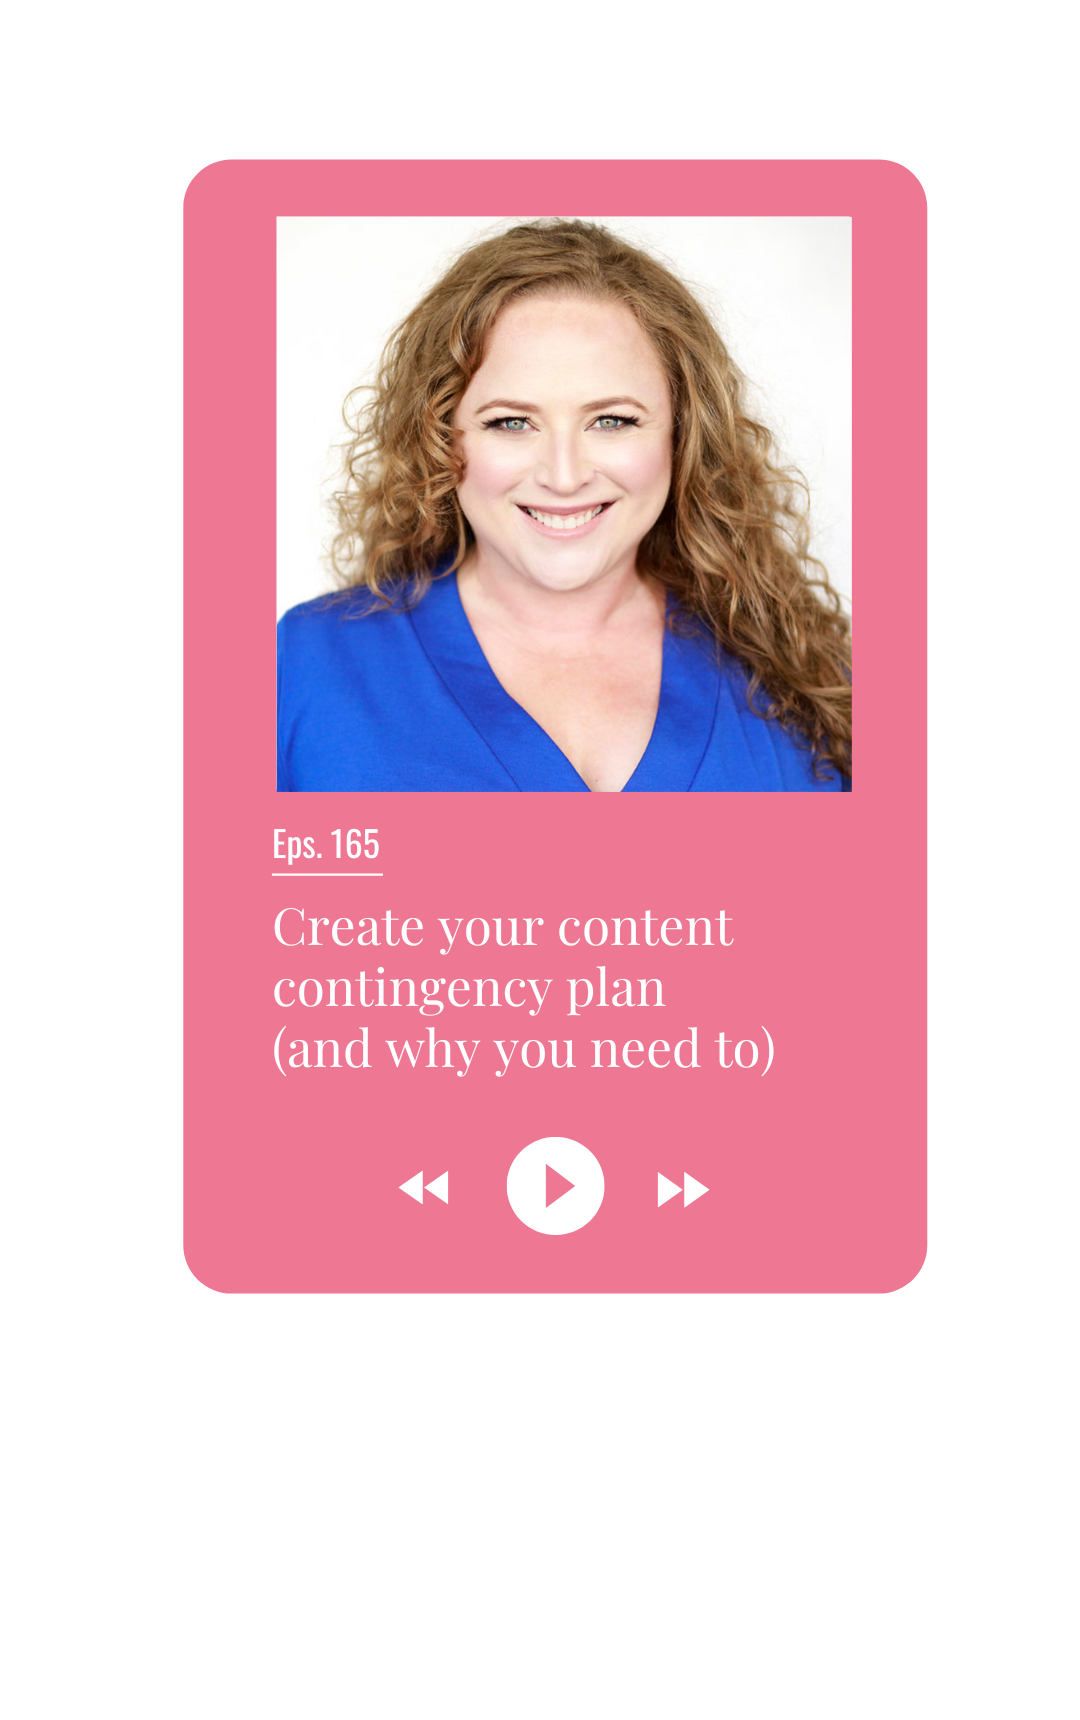 Create your content contingency plan (and why you need to)